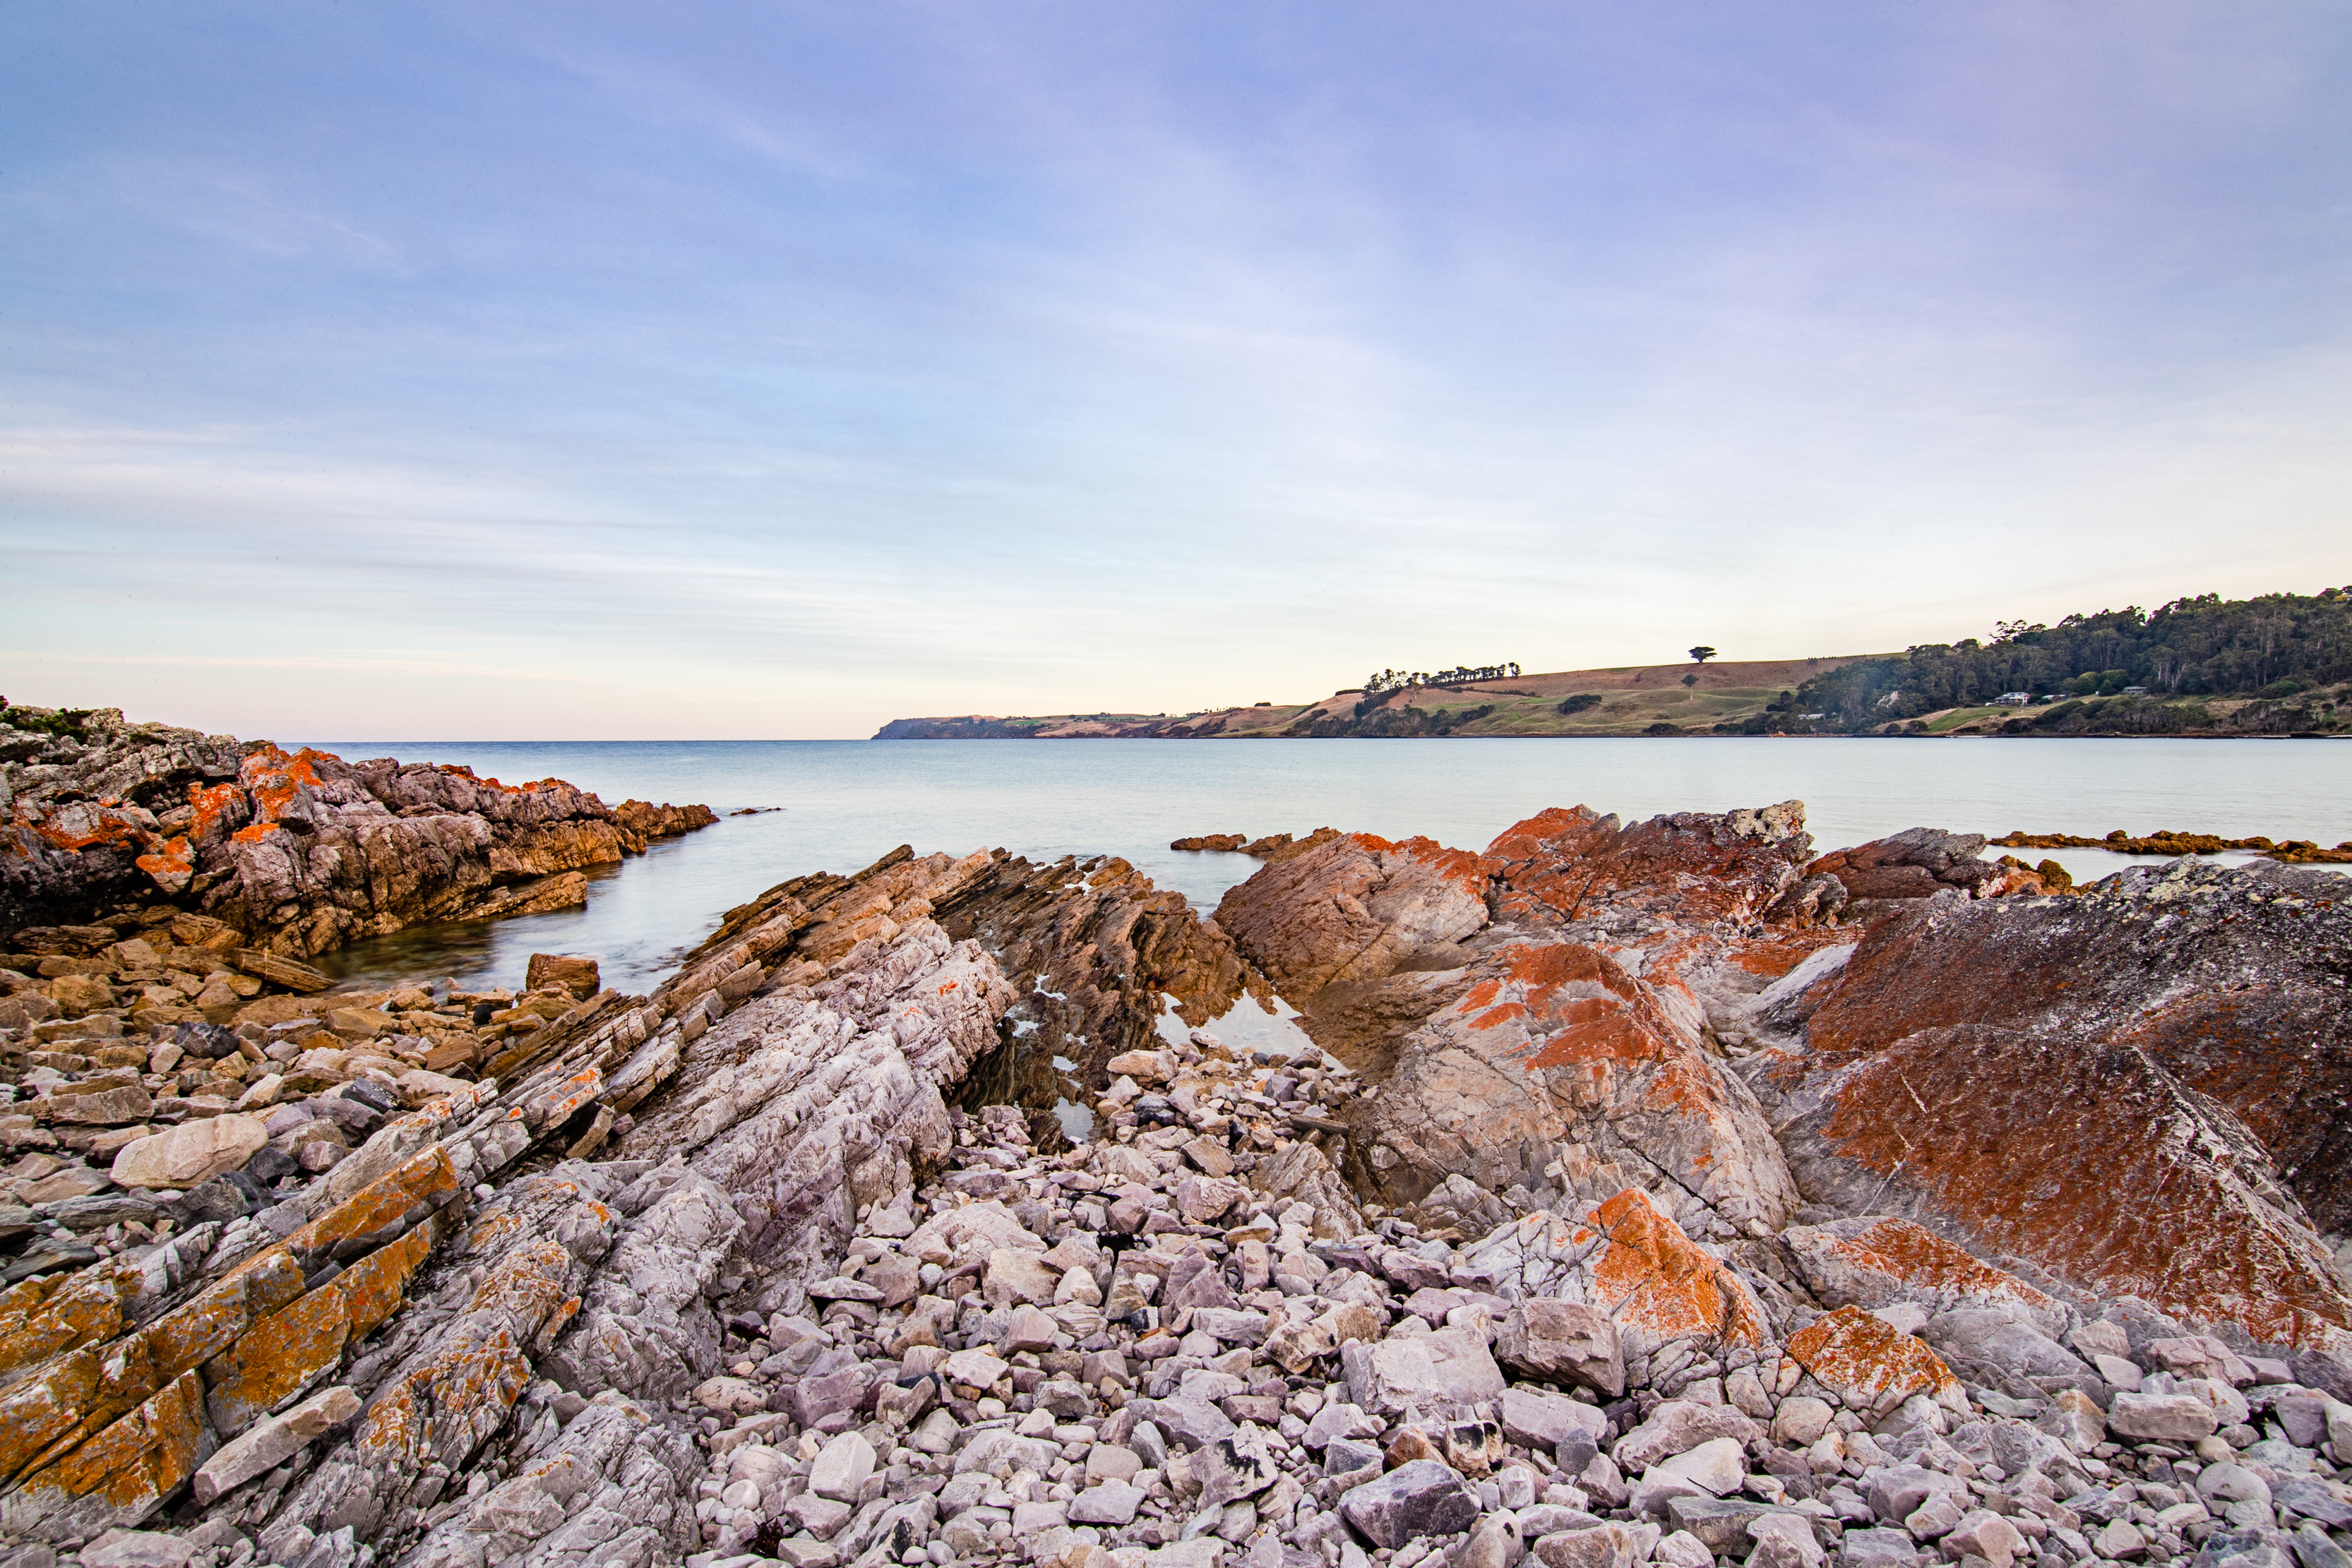 Wide angle image of the rocky coastline of Boat Harbour on a clear afternoon.